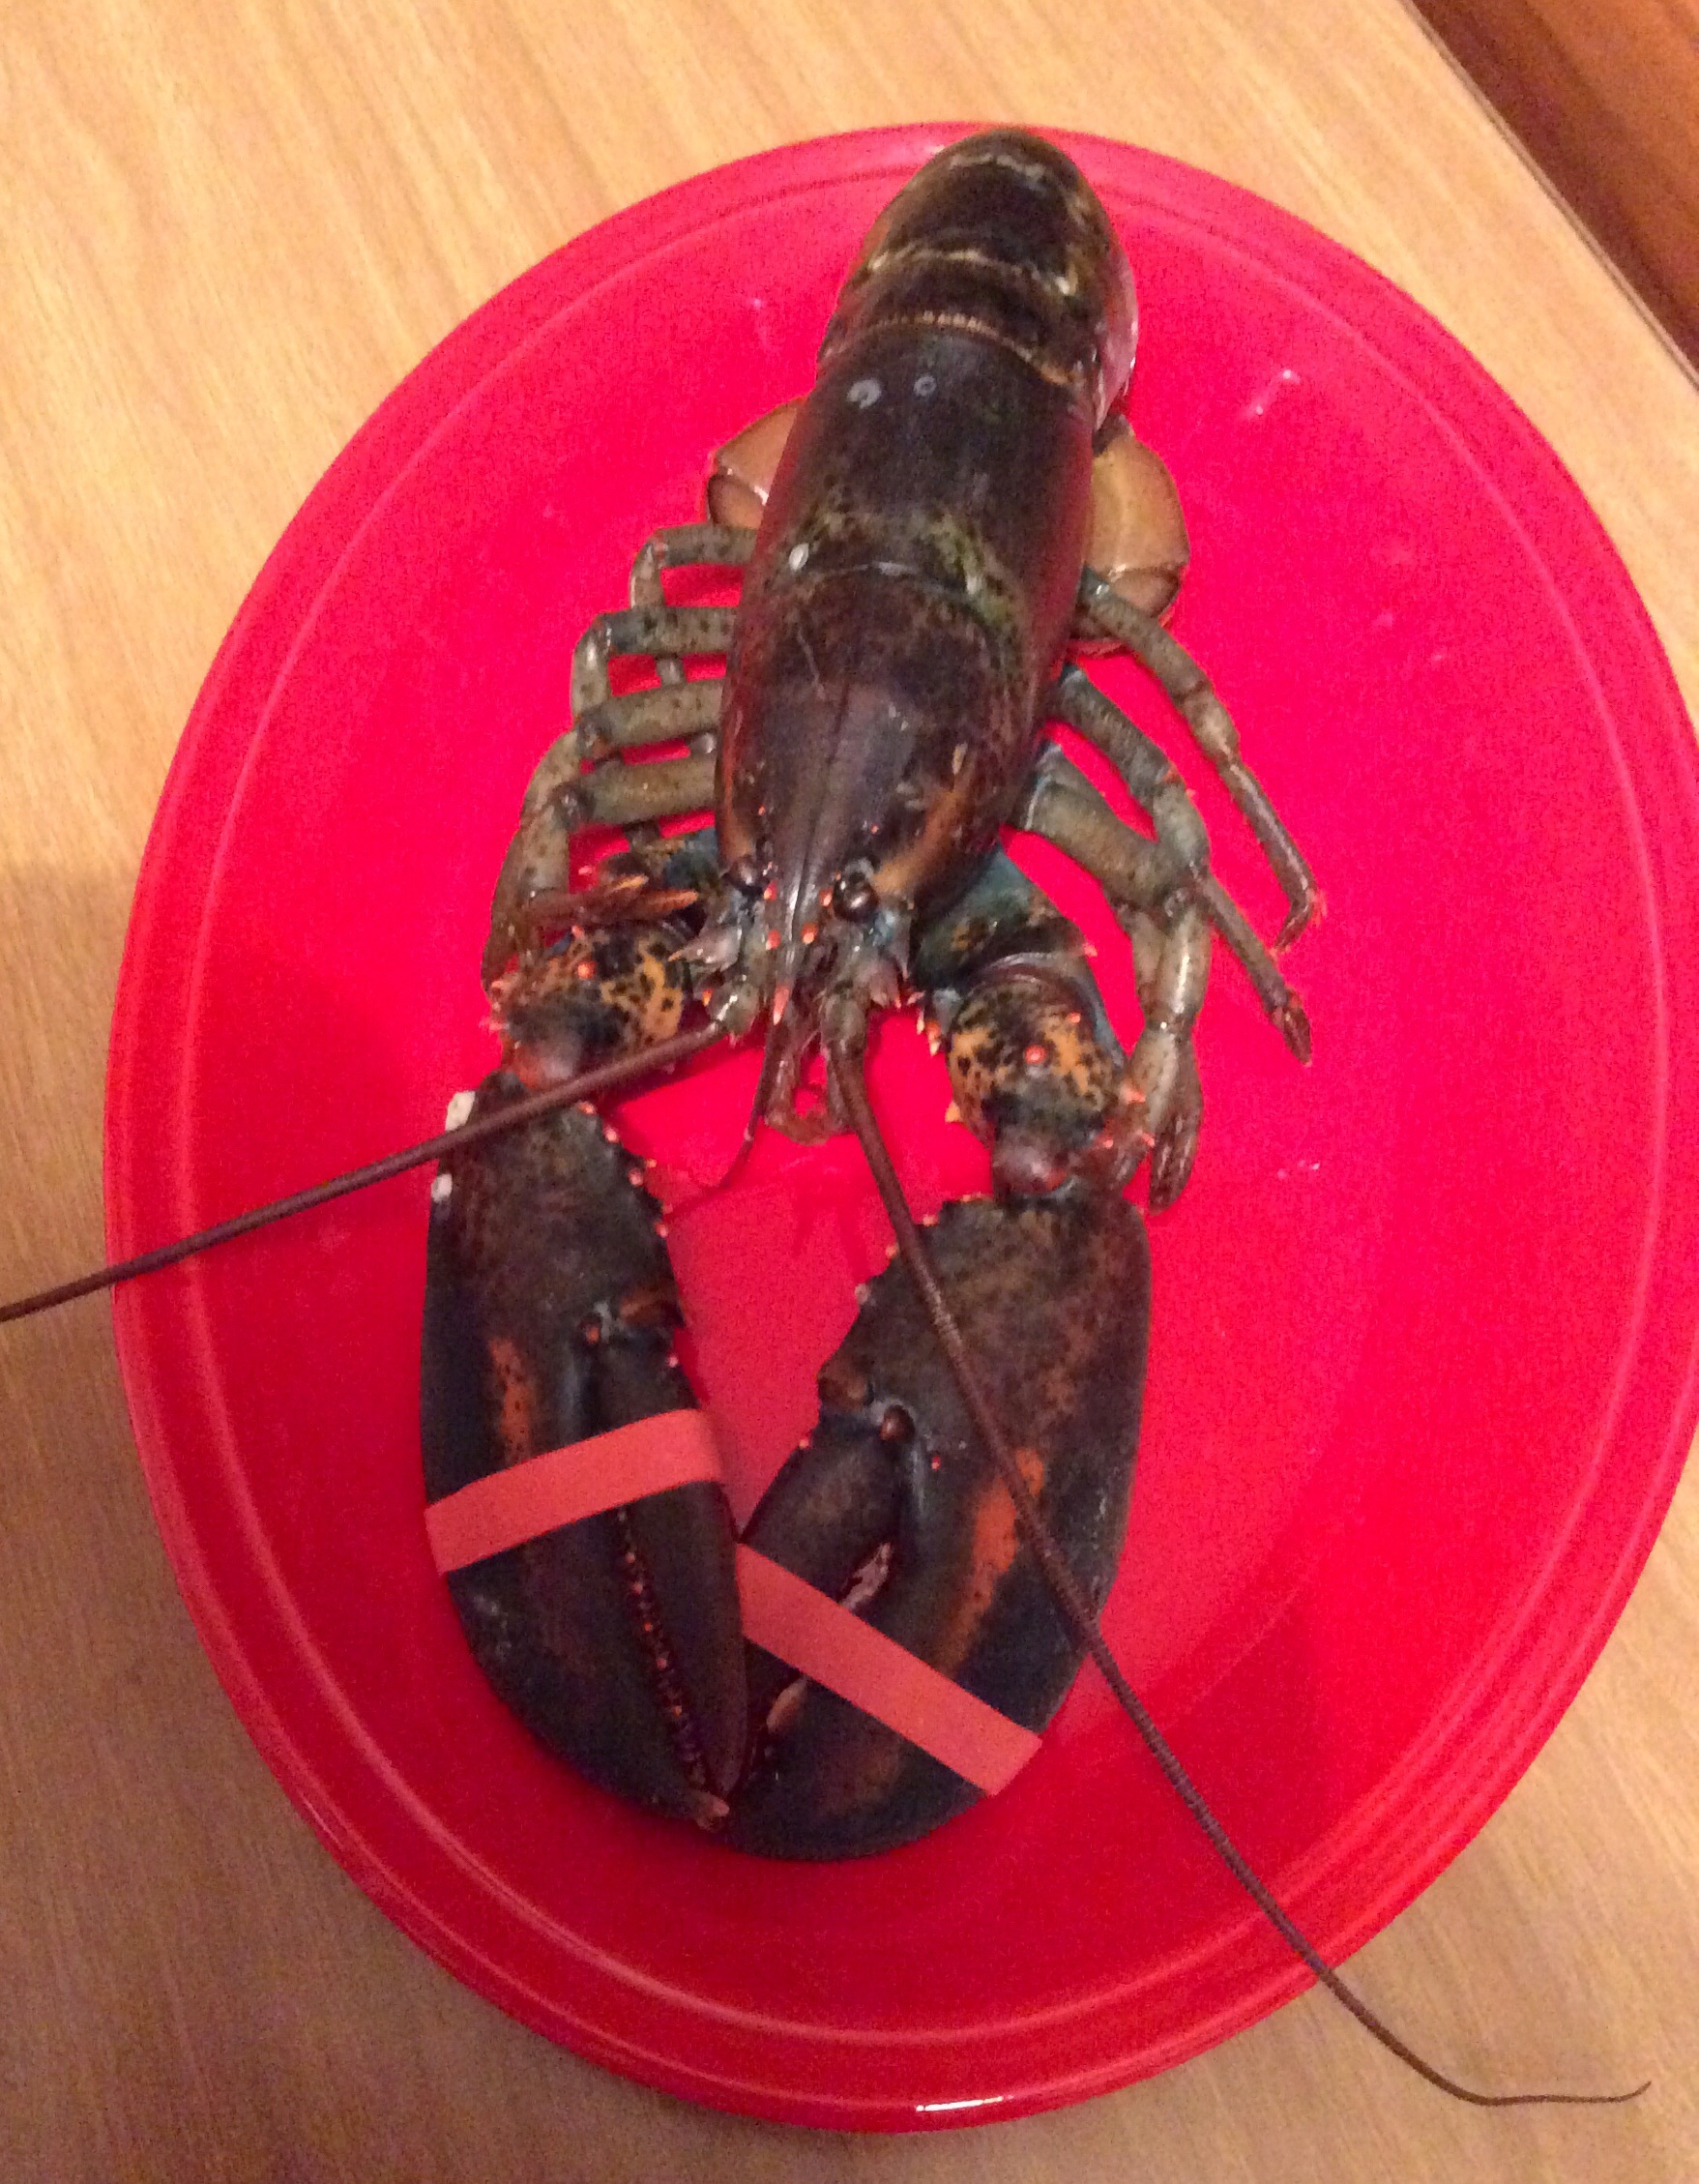 A Surprise Present From Bestie Anna A Big Alive And Kicking Lobster For Dinner Italy Chic Life